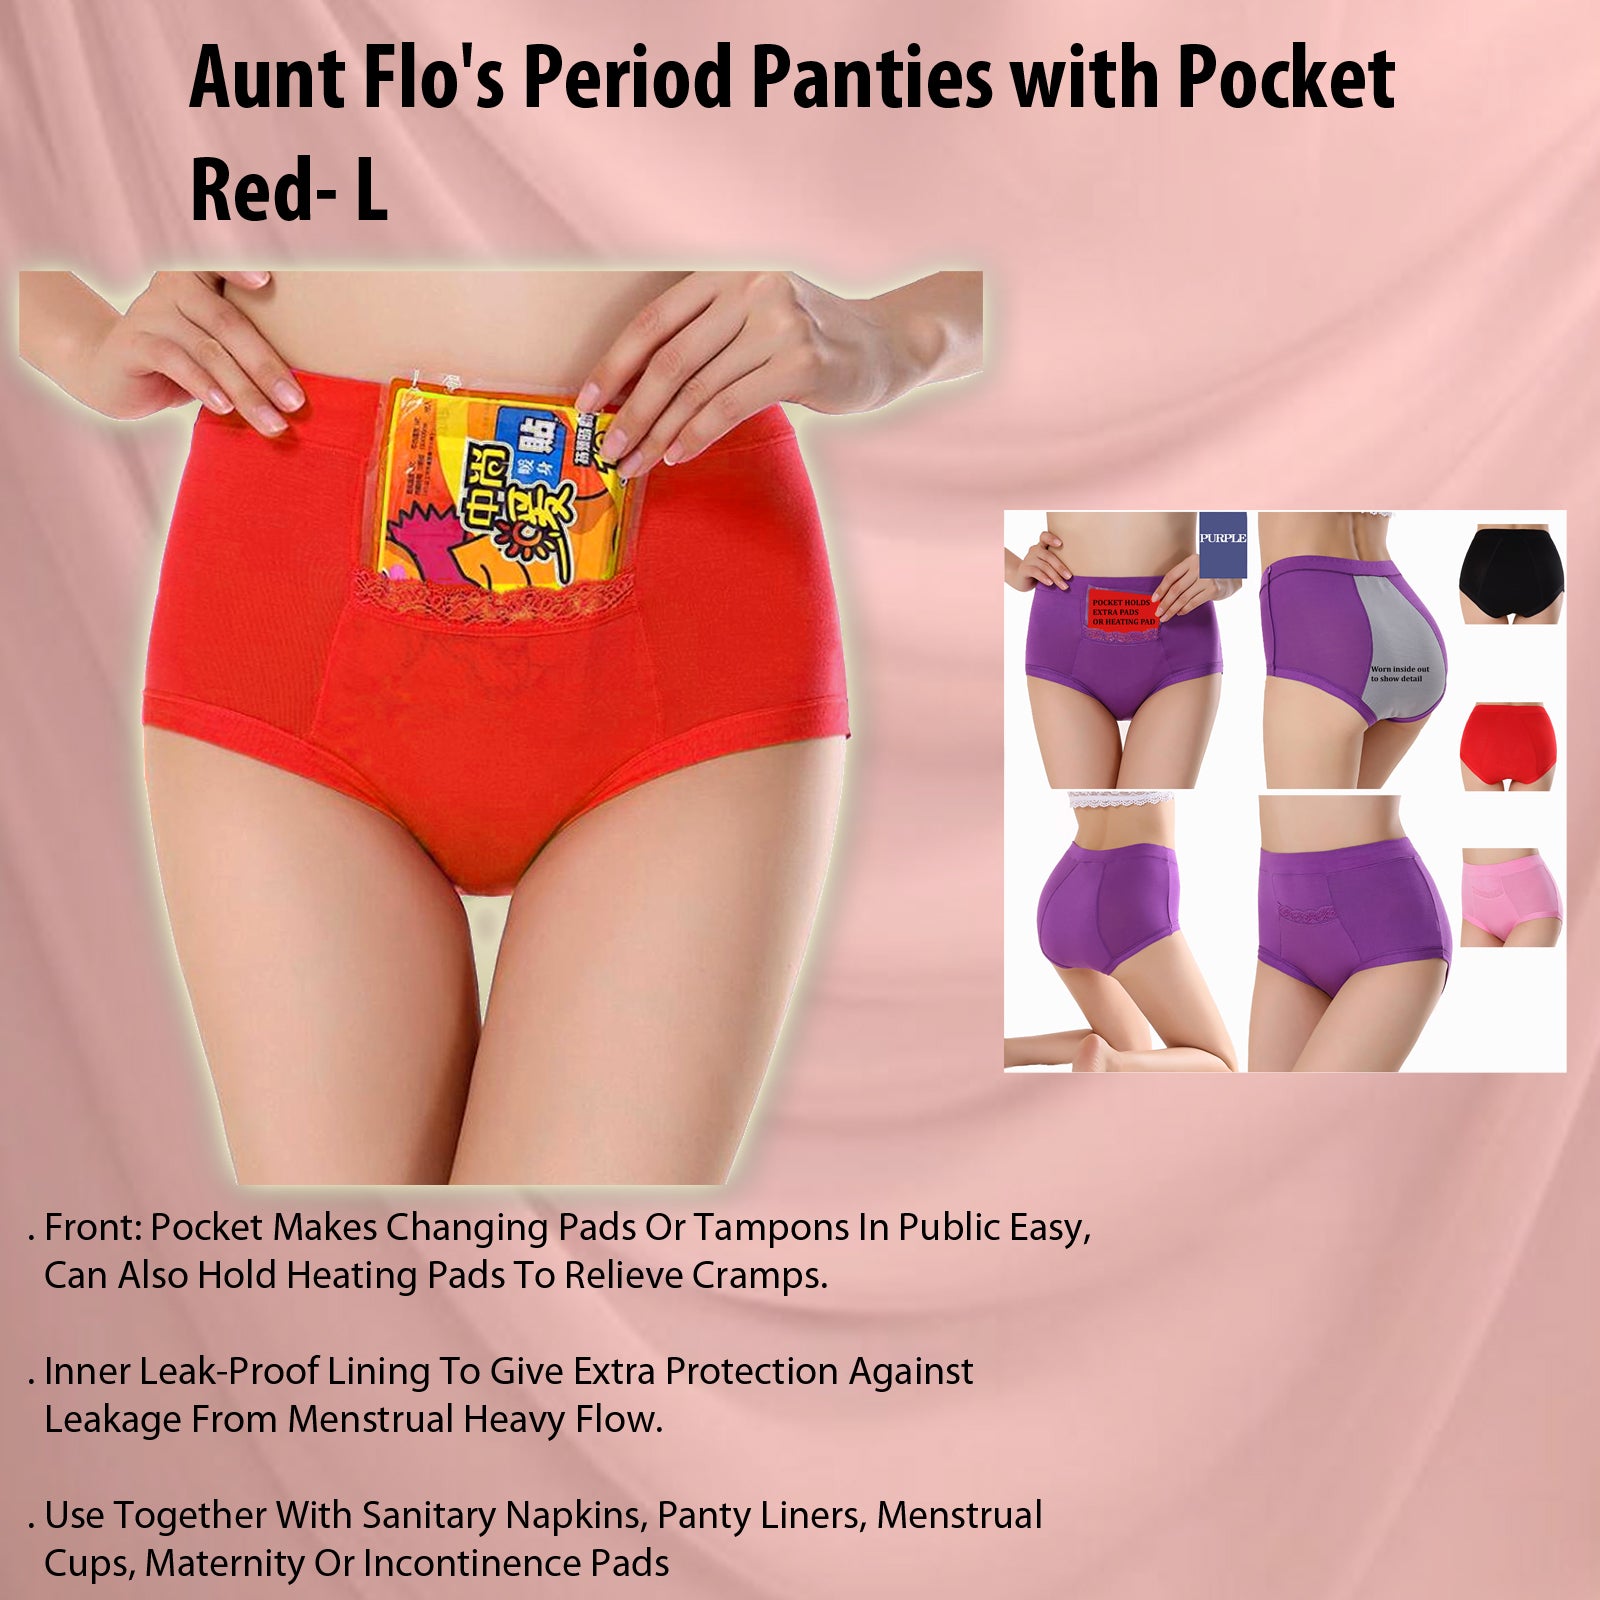 The Pocket In Women's Knickers: What Is It Actually For?